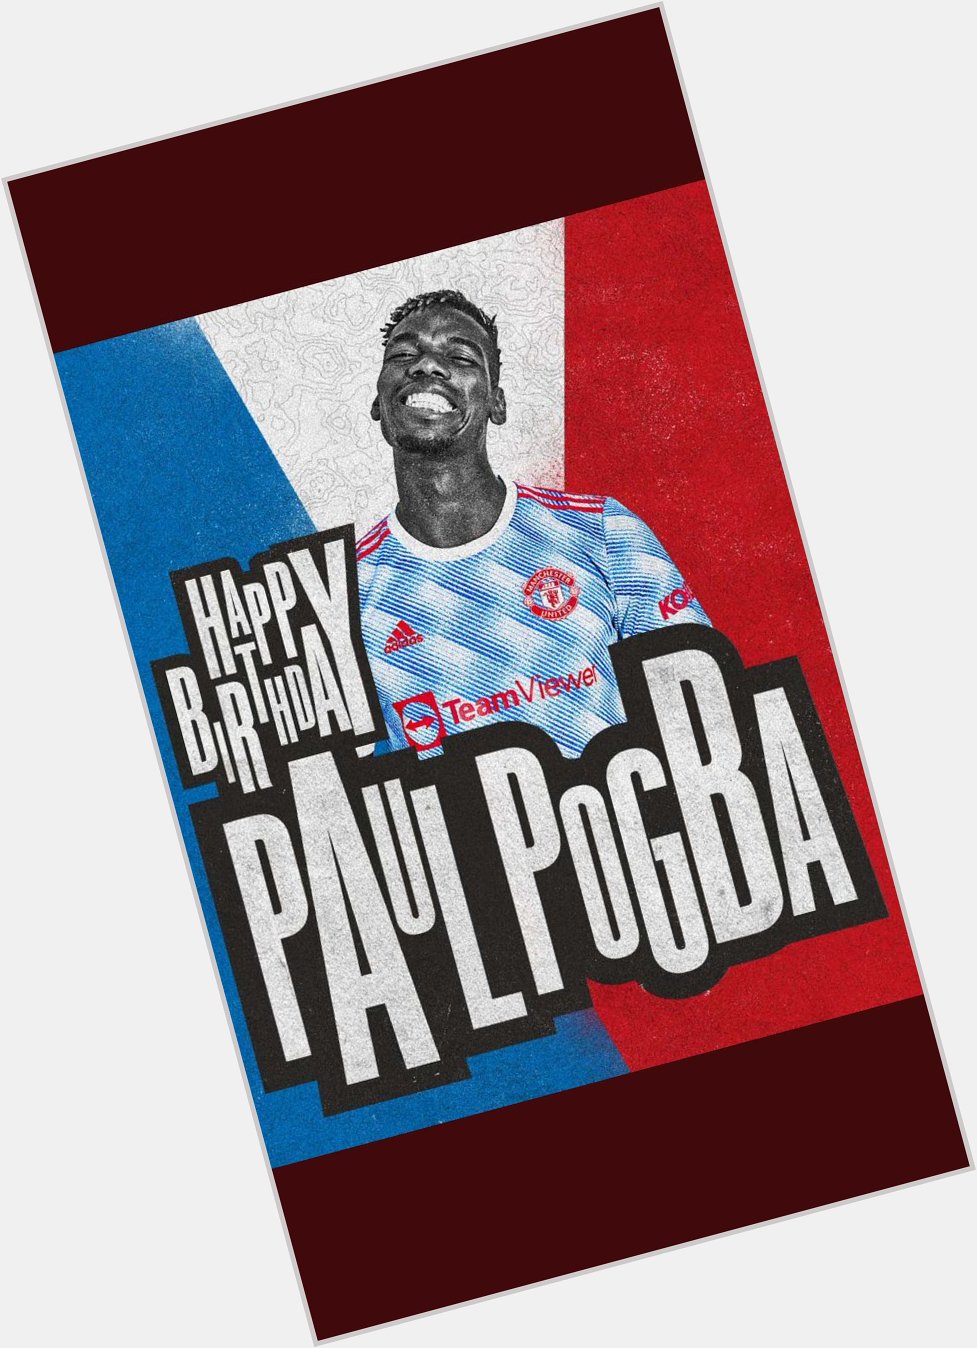 Happy birthday Paul pogba   Hope to see you score today and bag the win   